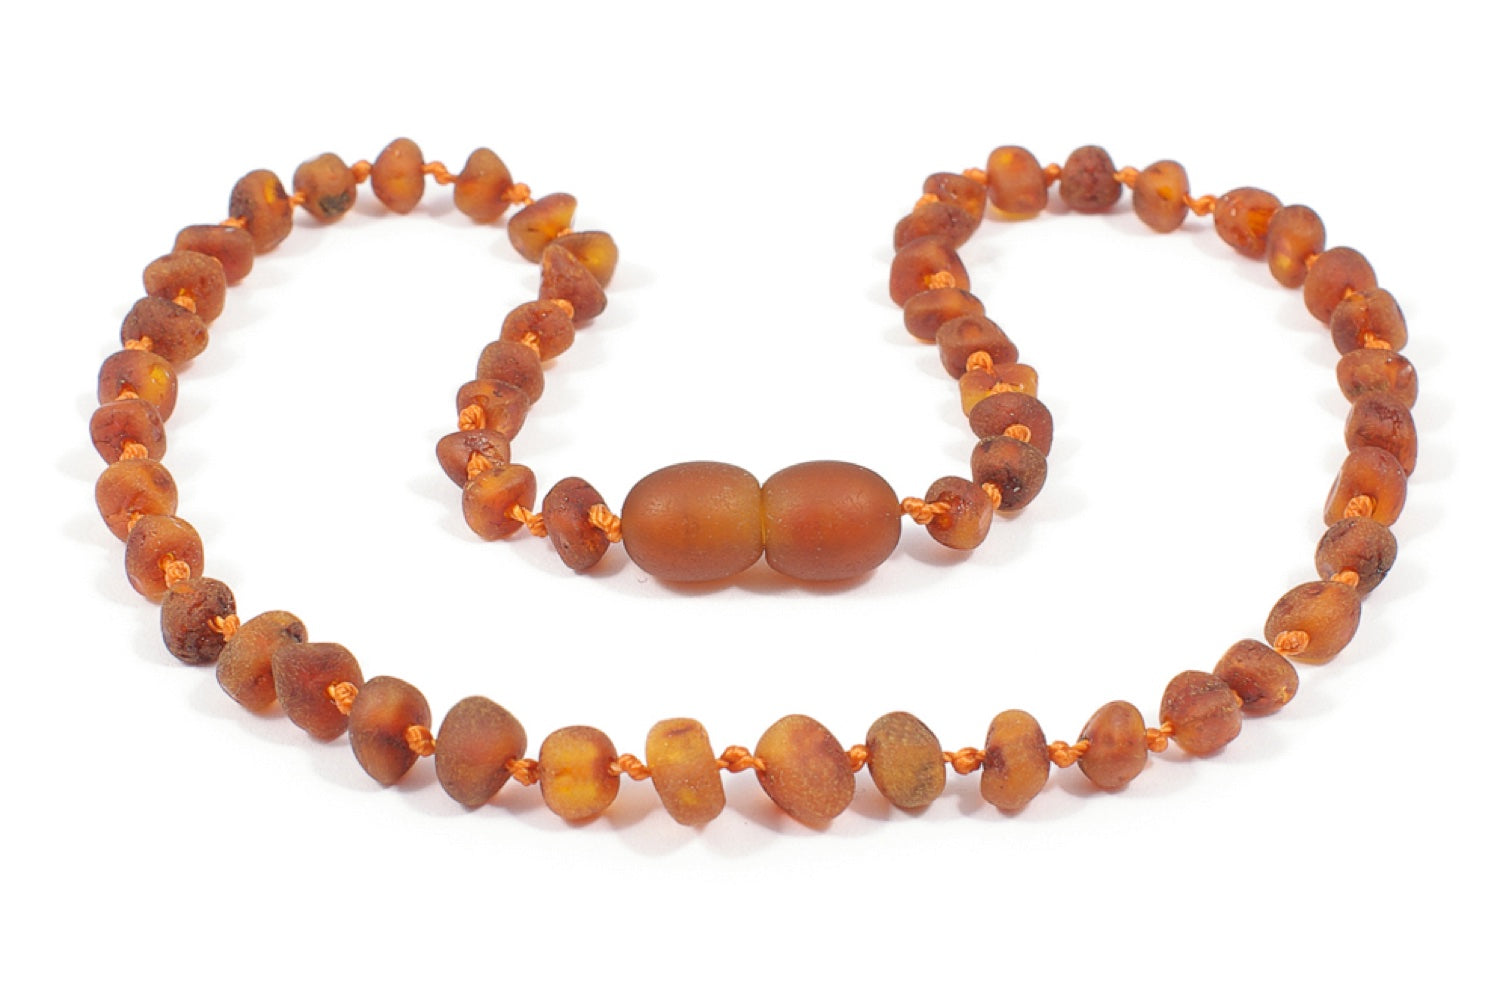 BALTIC AMBER TEETHING NECKLACE & BRACELET / COGNAC COLOUR / RAW UNPOLISHED / EXTRA EFFECTIVE